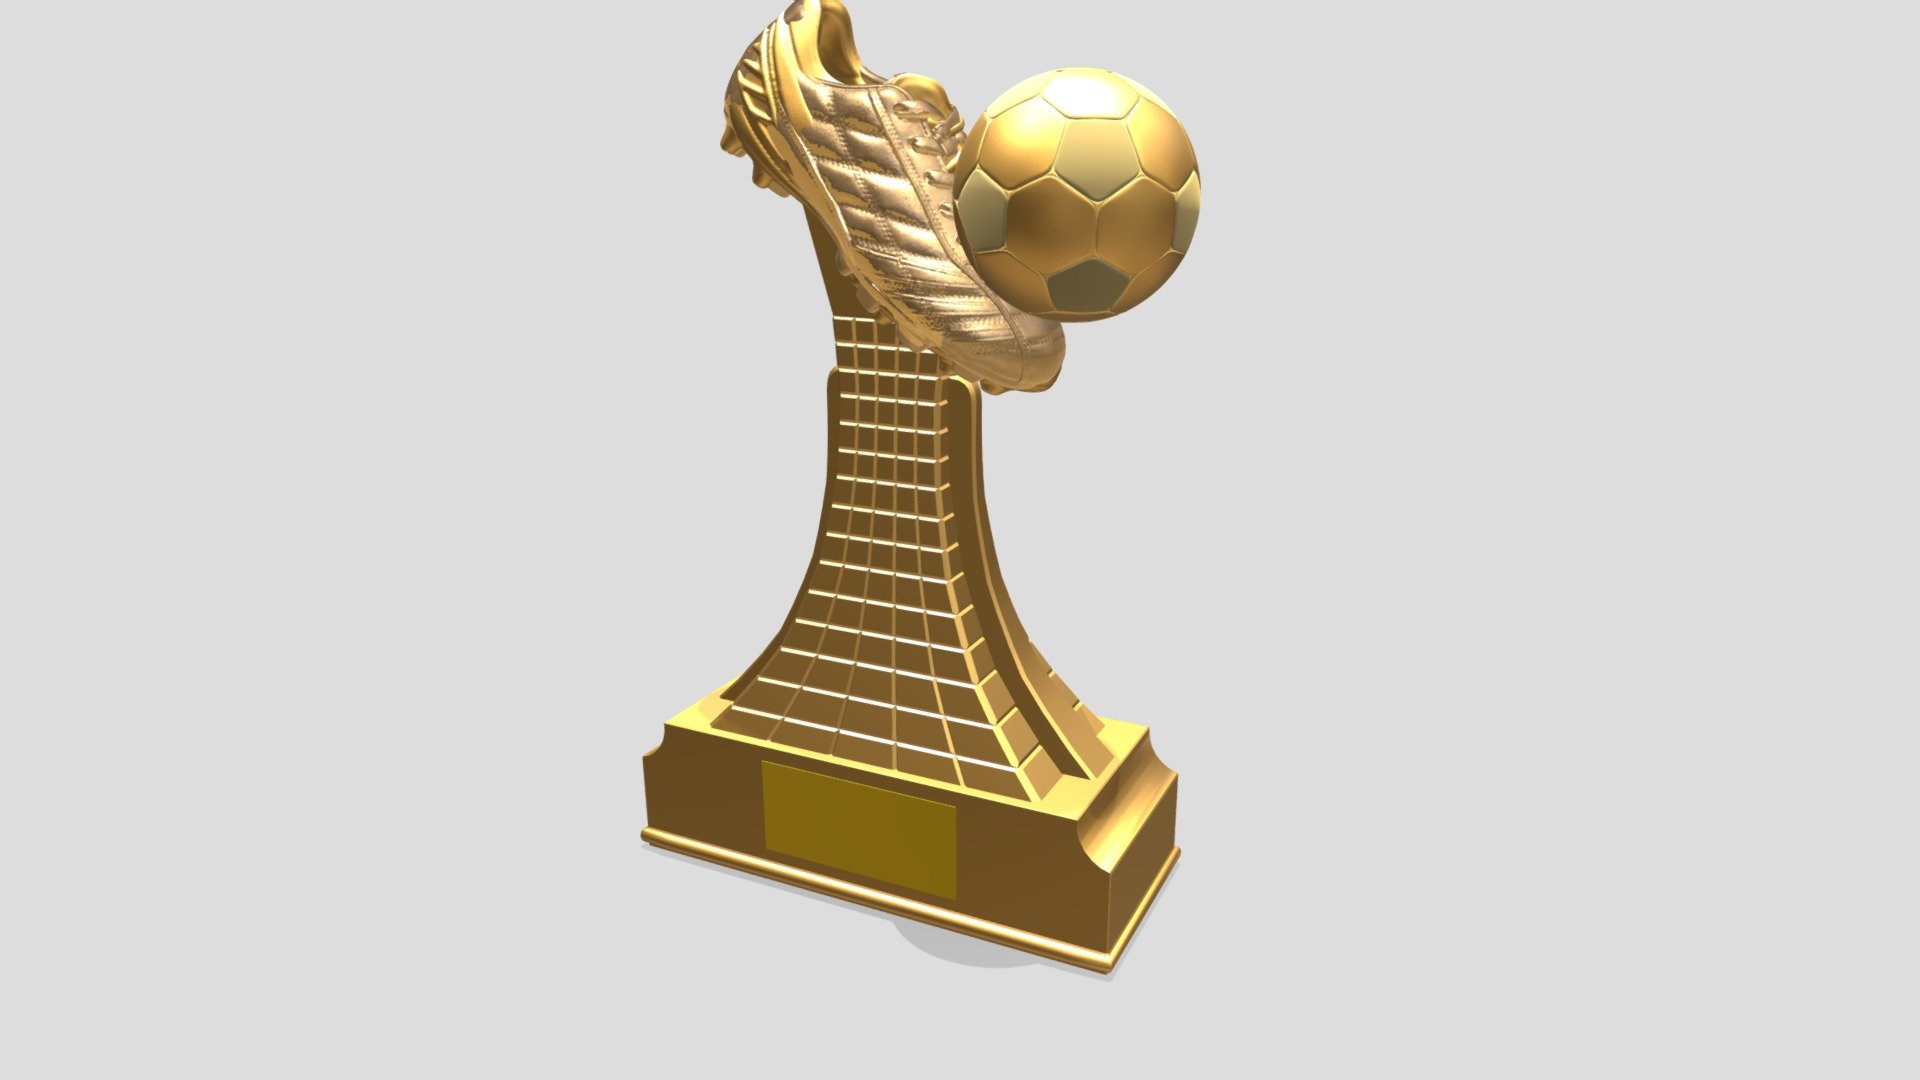 soccer trophy

To model your products, please visit this account on fiverr https://www.fiverr.com/msfedawy Contact me if you want any modifications to this model. Or if you want to build a different model. G-mail: msfedawy@gmail.com - soccer trophy - 3D model by Fedawy 3d model